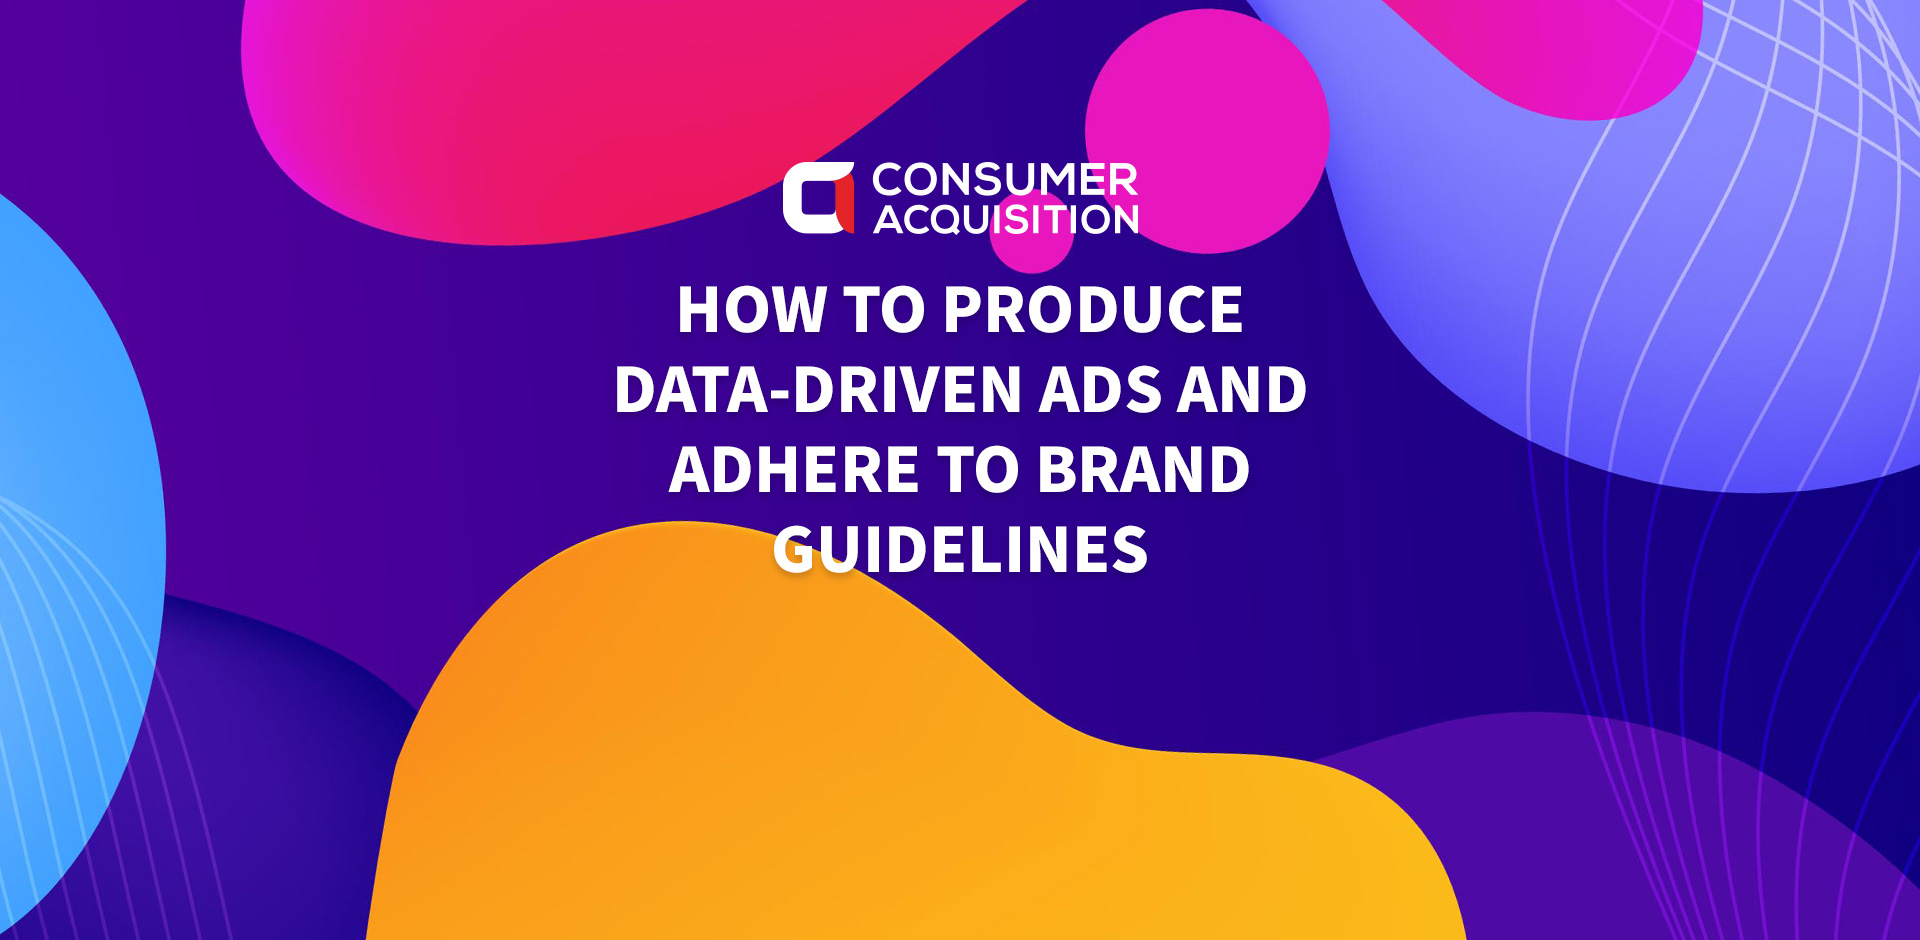 How to Produce Data-Driven Ads and Adhere to Brand Guidelines